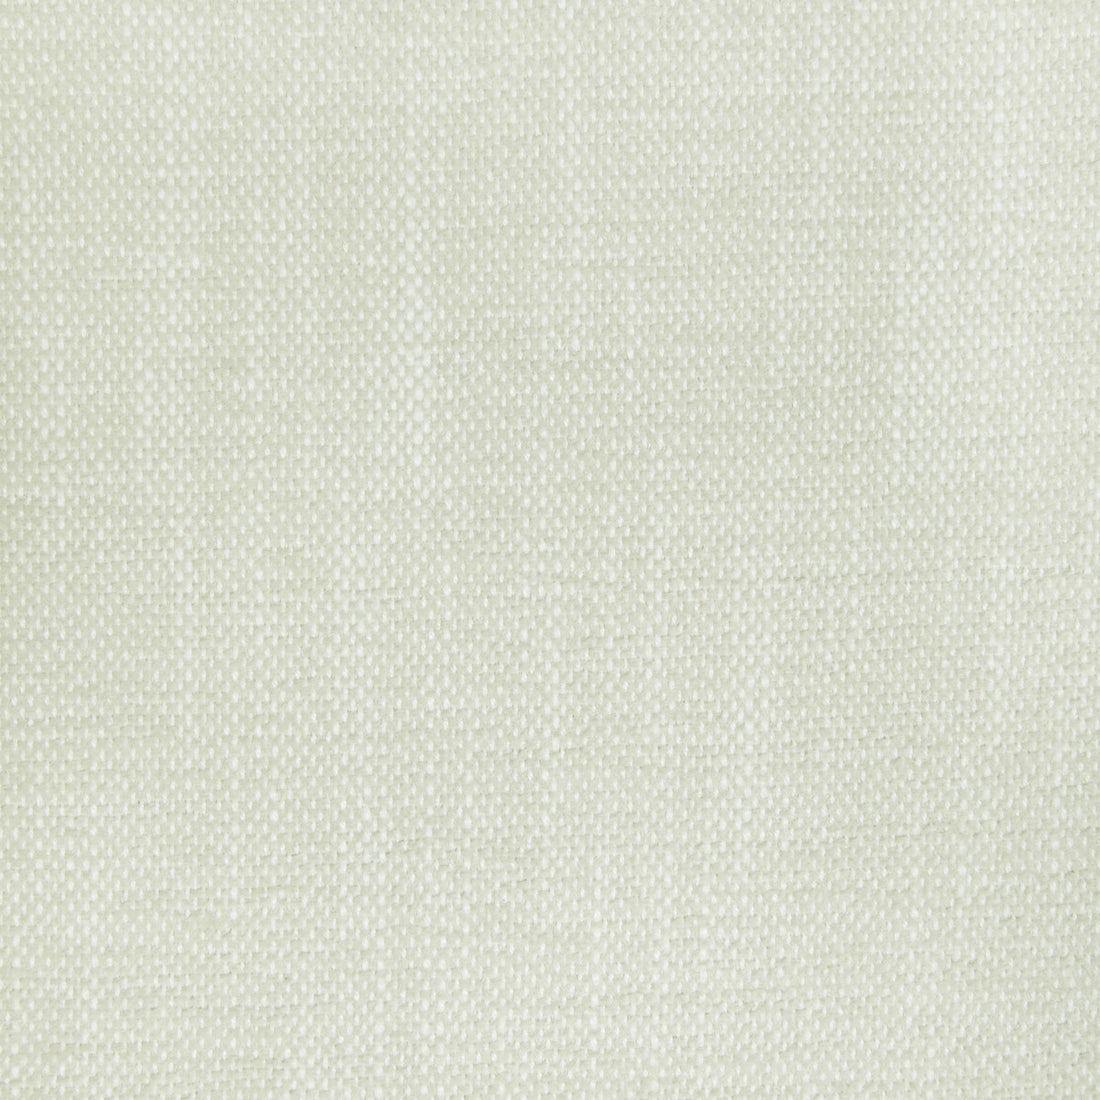 Kravet Smart-36885 fabric in 101 color - pattern 36885.101.0 - by Kravet Smart in the Inside Out Performance Fabrics collection